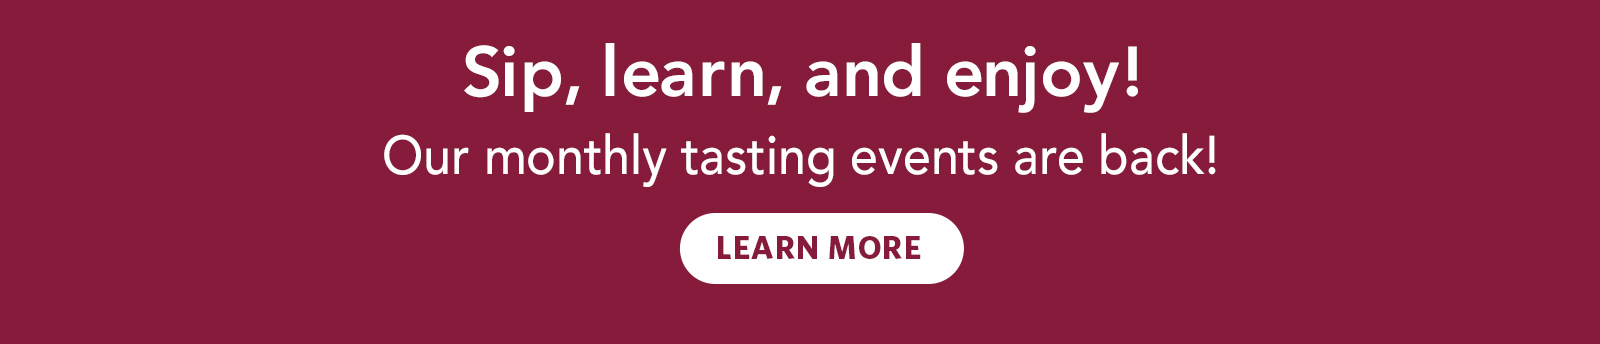 Sip, learn, and enjoy! Our monthly tasting events are back! Learn More!